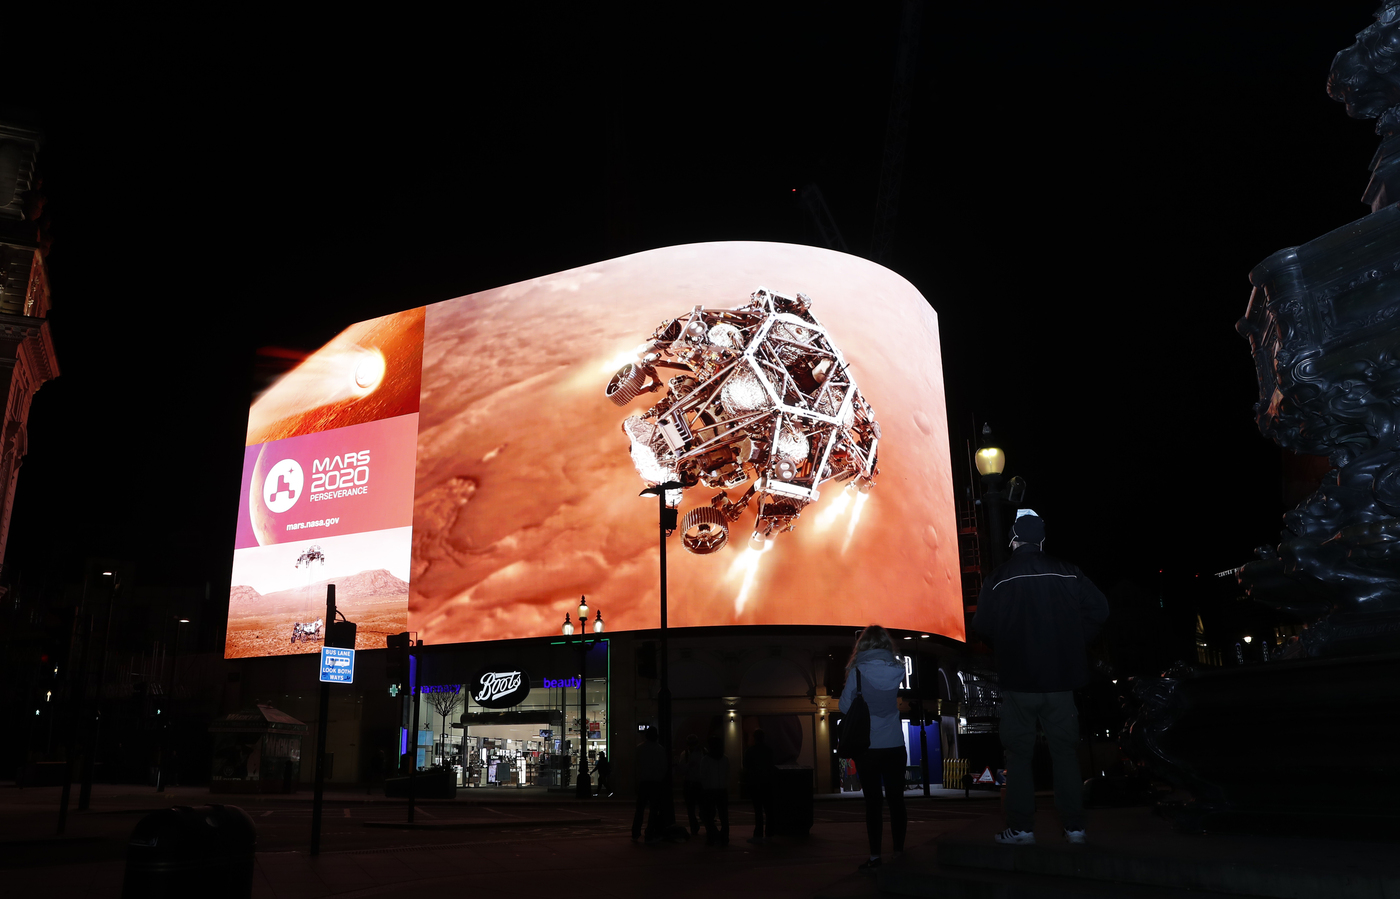 Images from Nasa are streamed live showing the landing of NASA's Perseverance on Mars, shown on Piccadilly Lights in central London, Thursday Feb. 18, 2021. The Mars rover landing mission begins it's search for traces of life after the successful landing, to explore and collect samples for future return to Earth.(AP Photo/Alastair Grant)